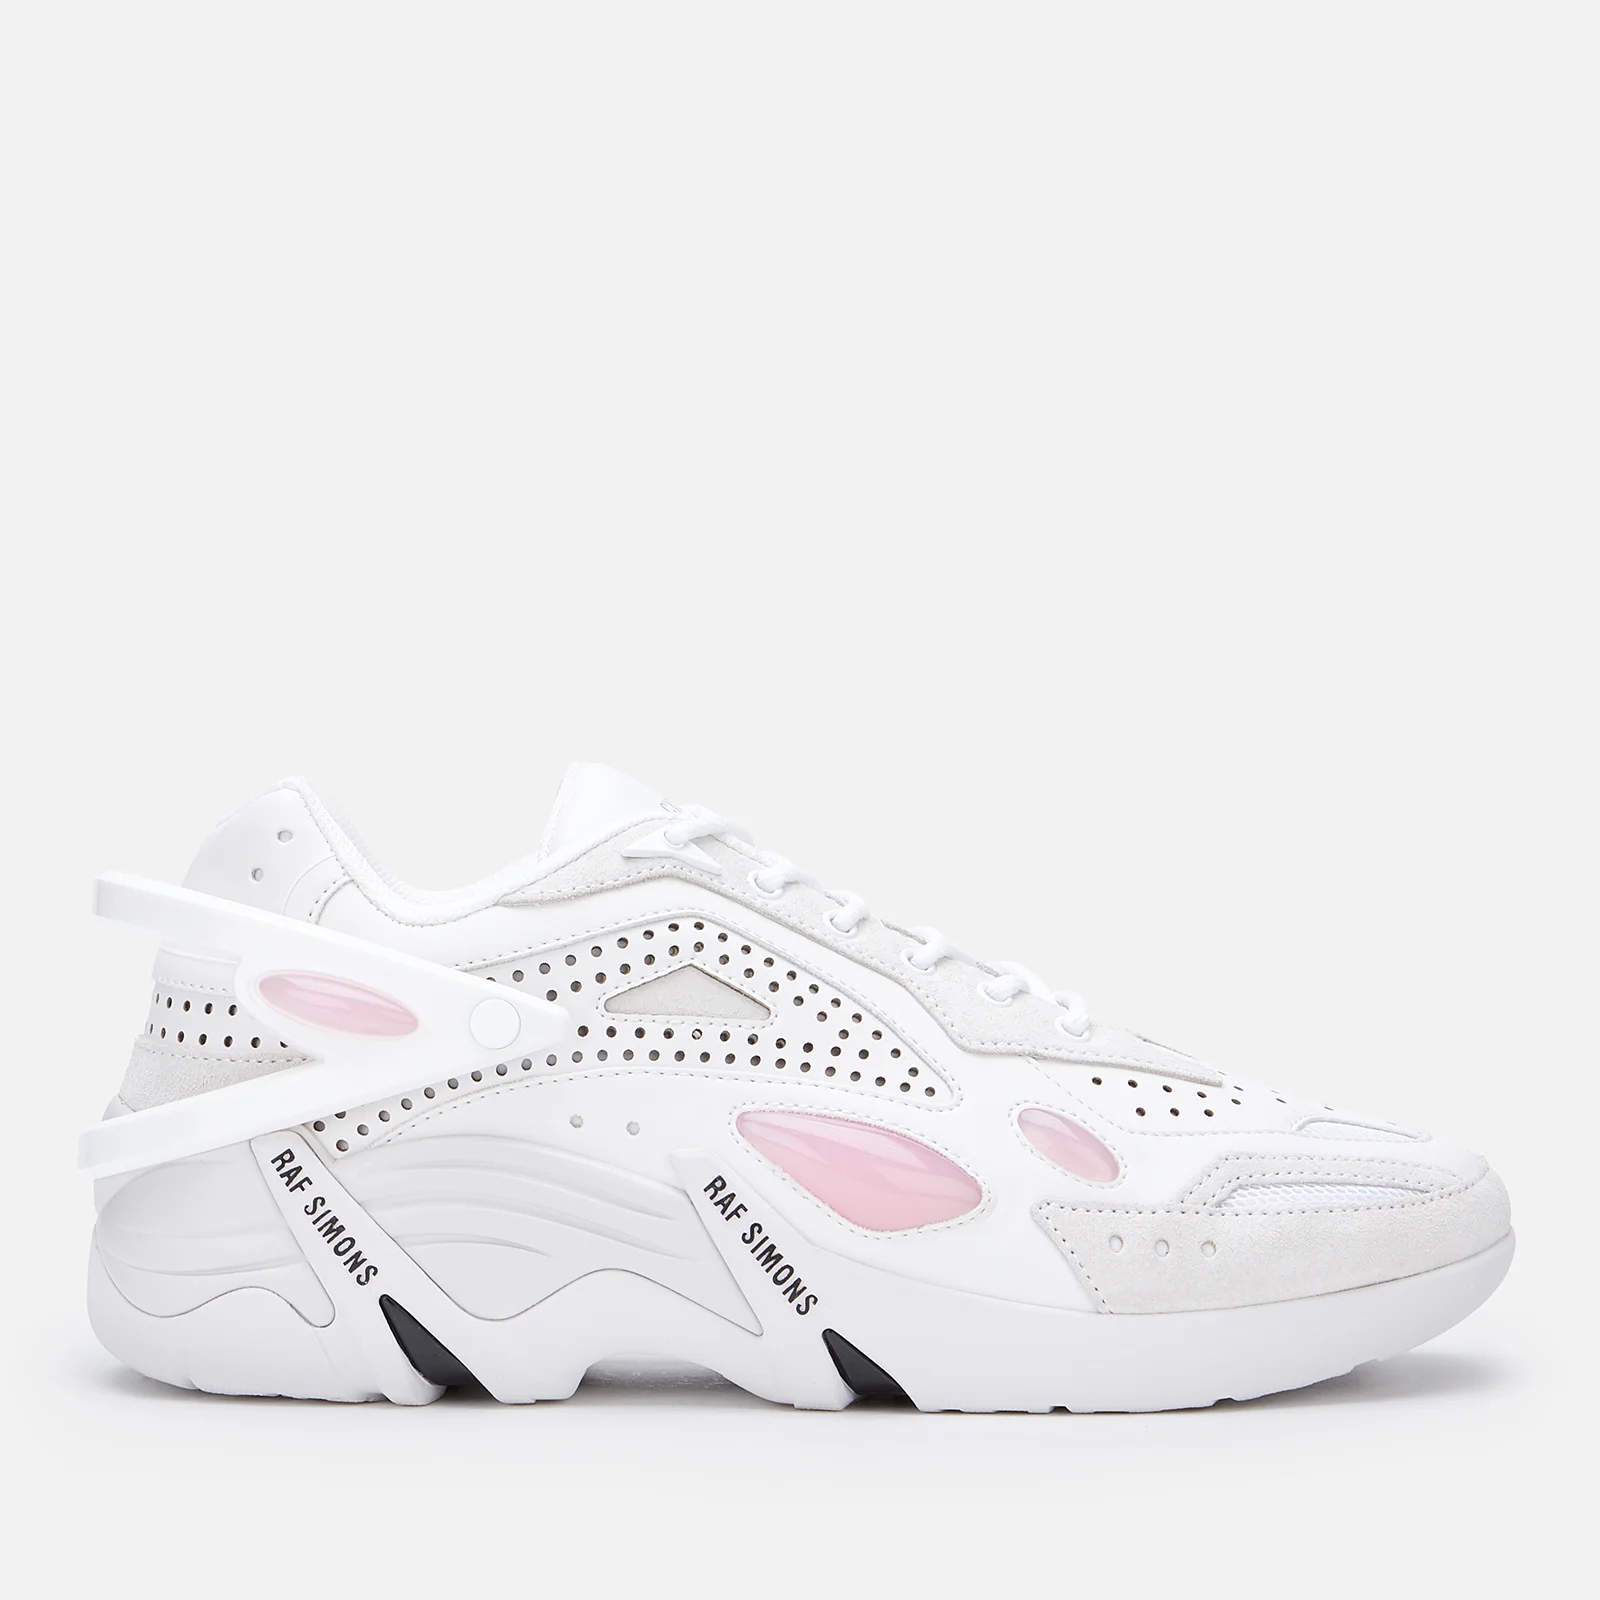 Raf Simons Men's Cylon-21 Leather Trainers - White Image 1